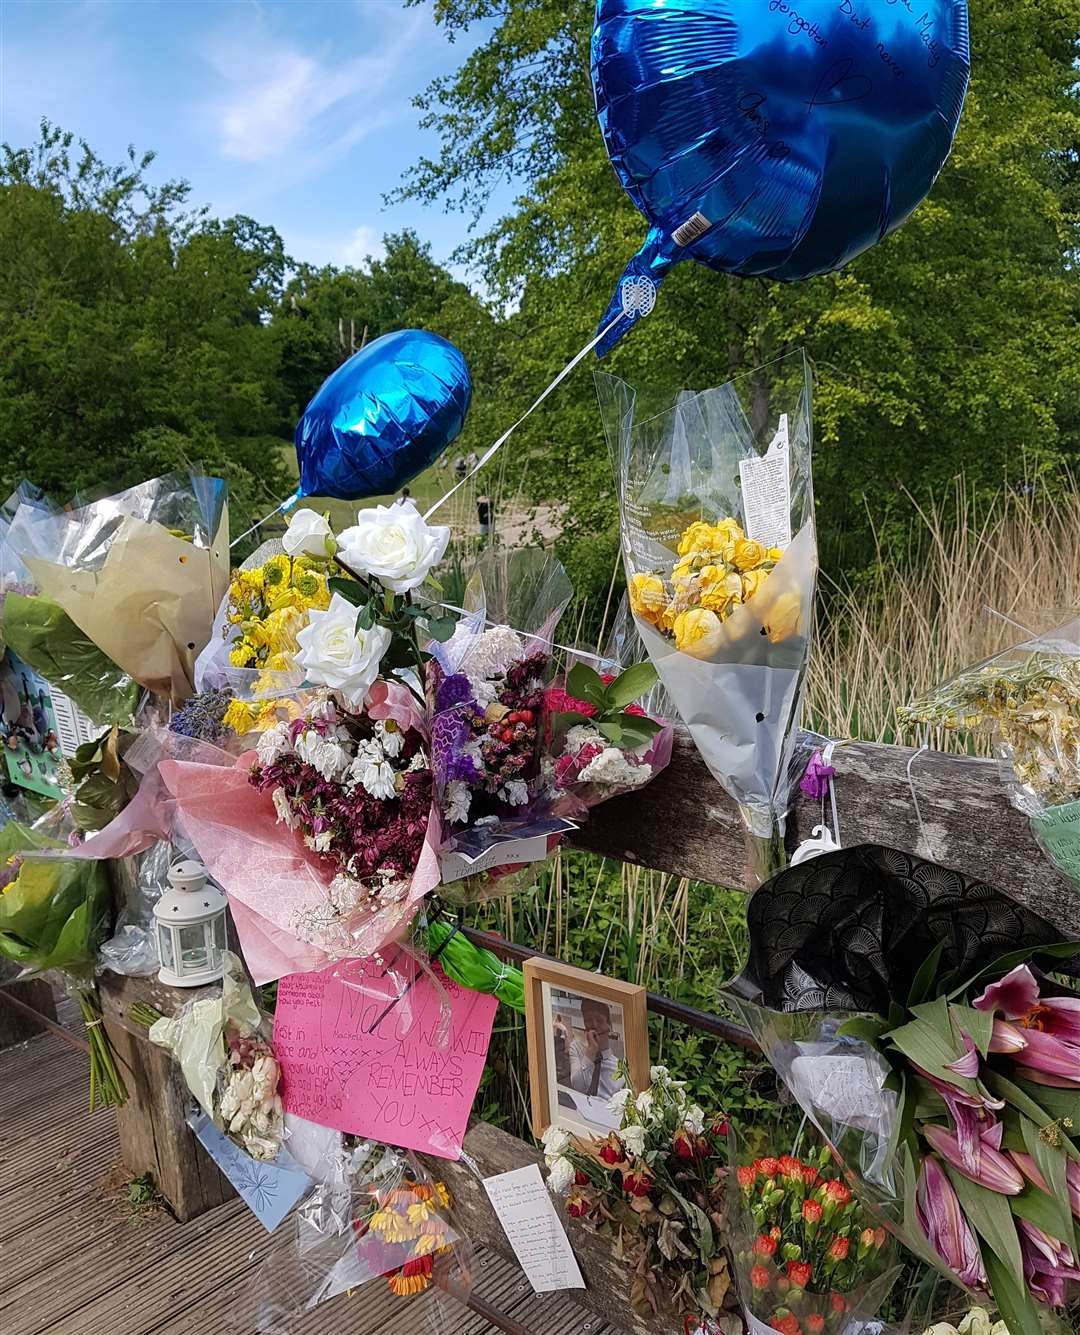 Floral tributes were left in Dunorlan Park in memory of Matthew